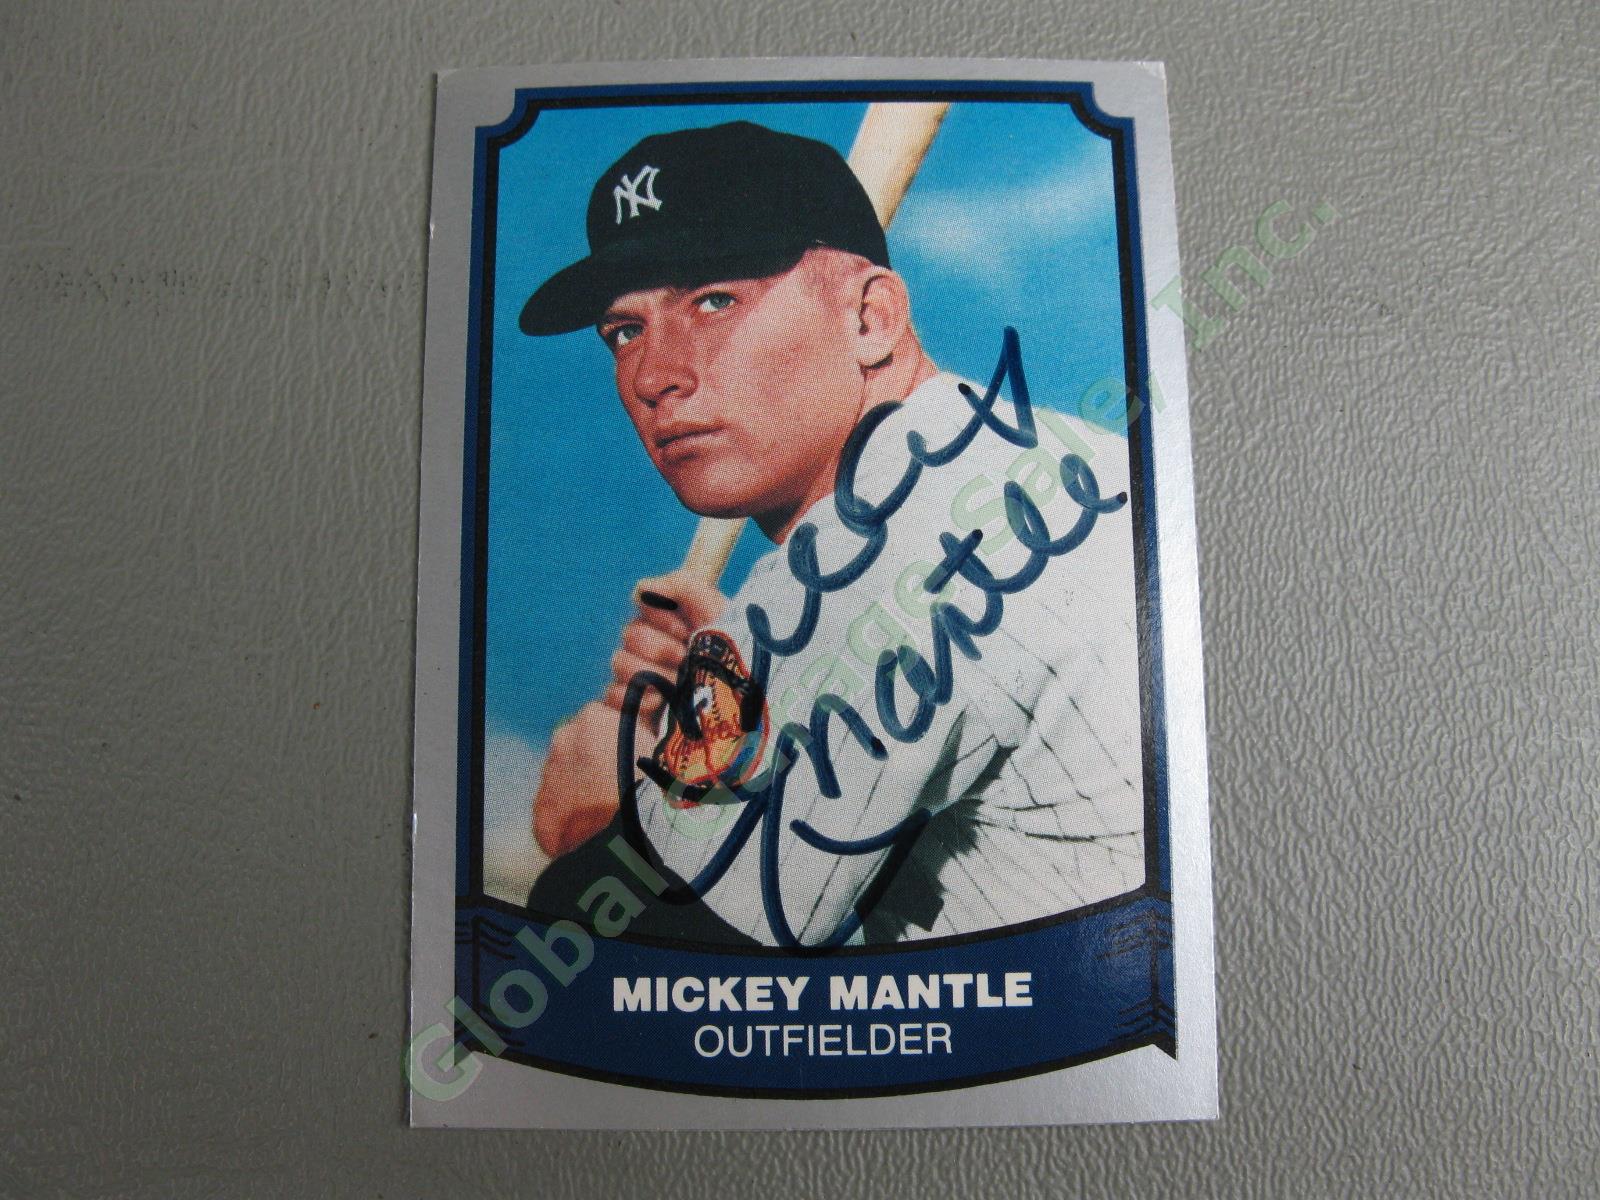 Mickey Mantle Hand Signed Baseball Card Legends #7 JSA Authenticated NY Yankees 1